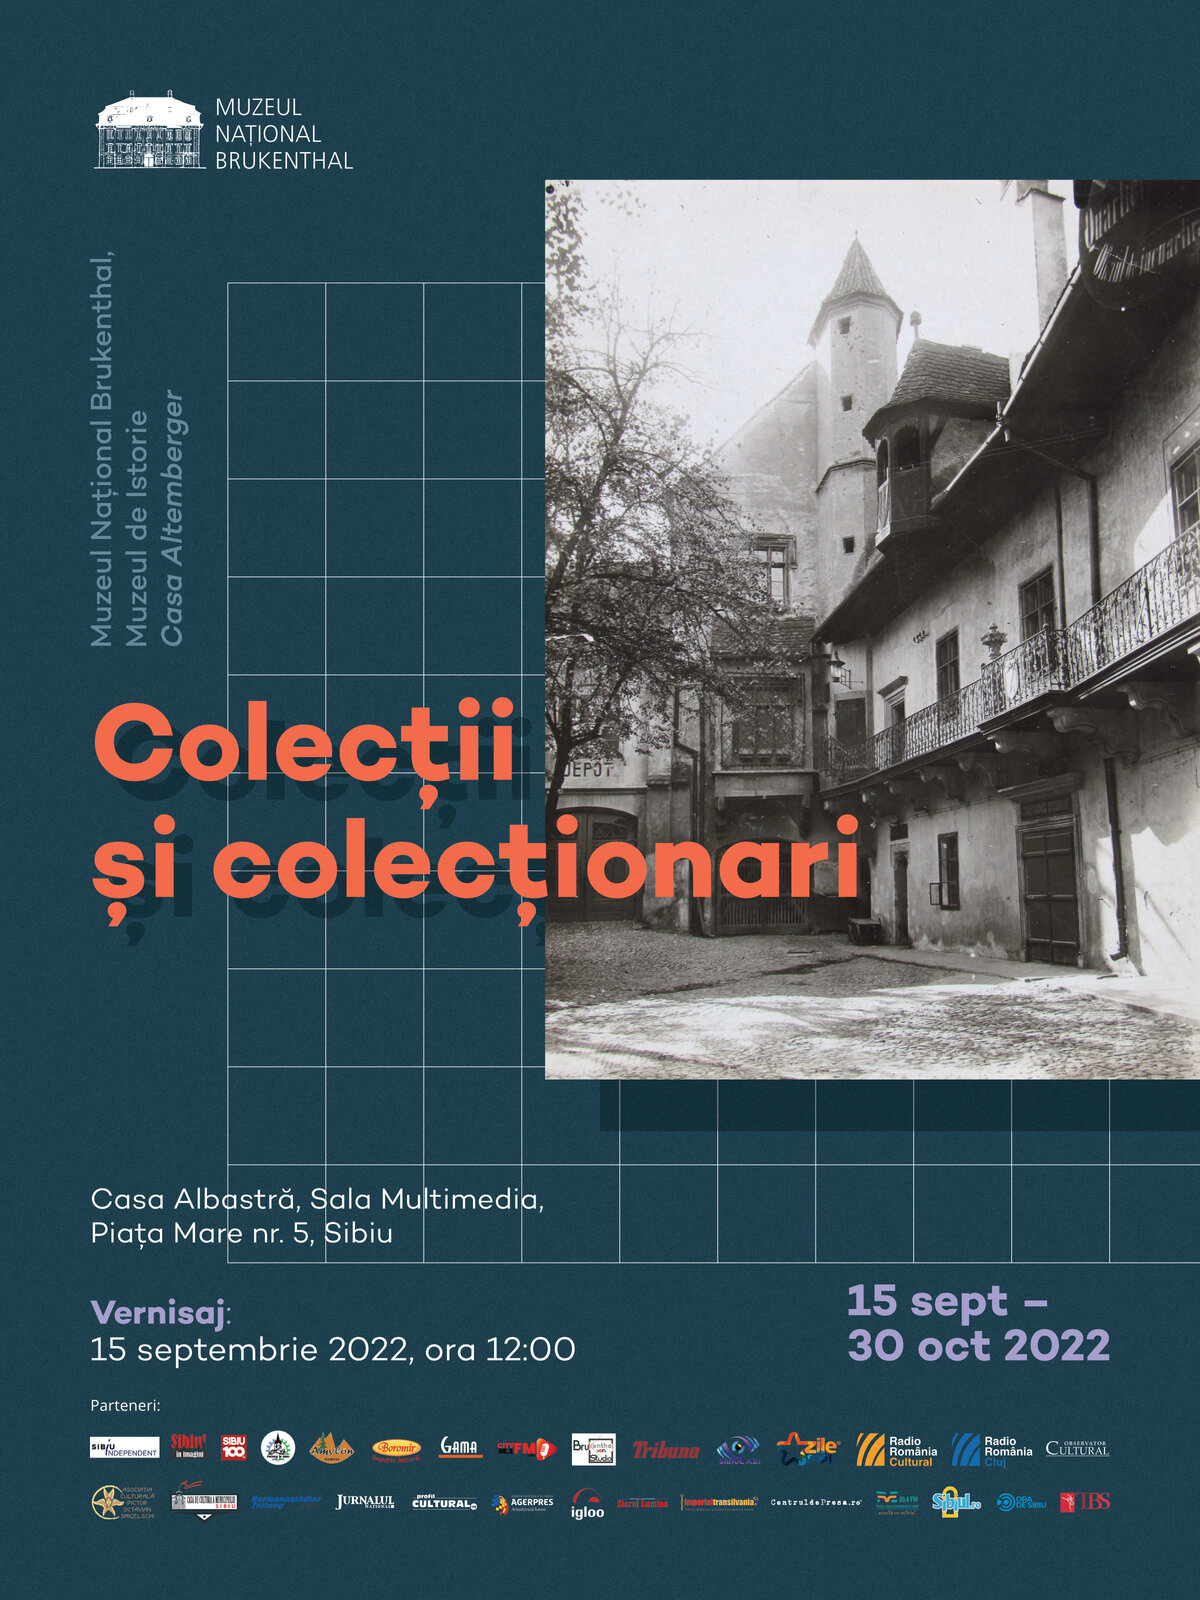 Collections and collectors